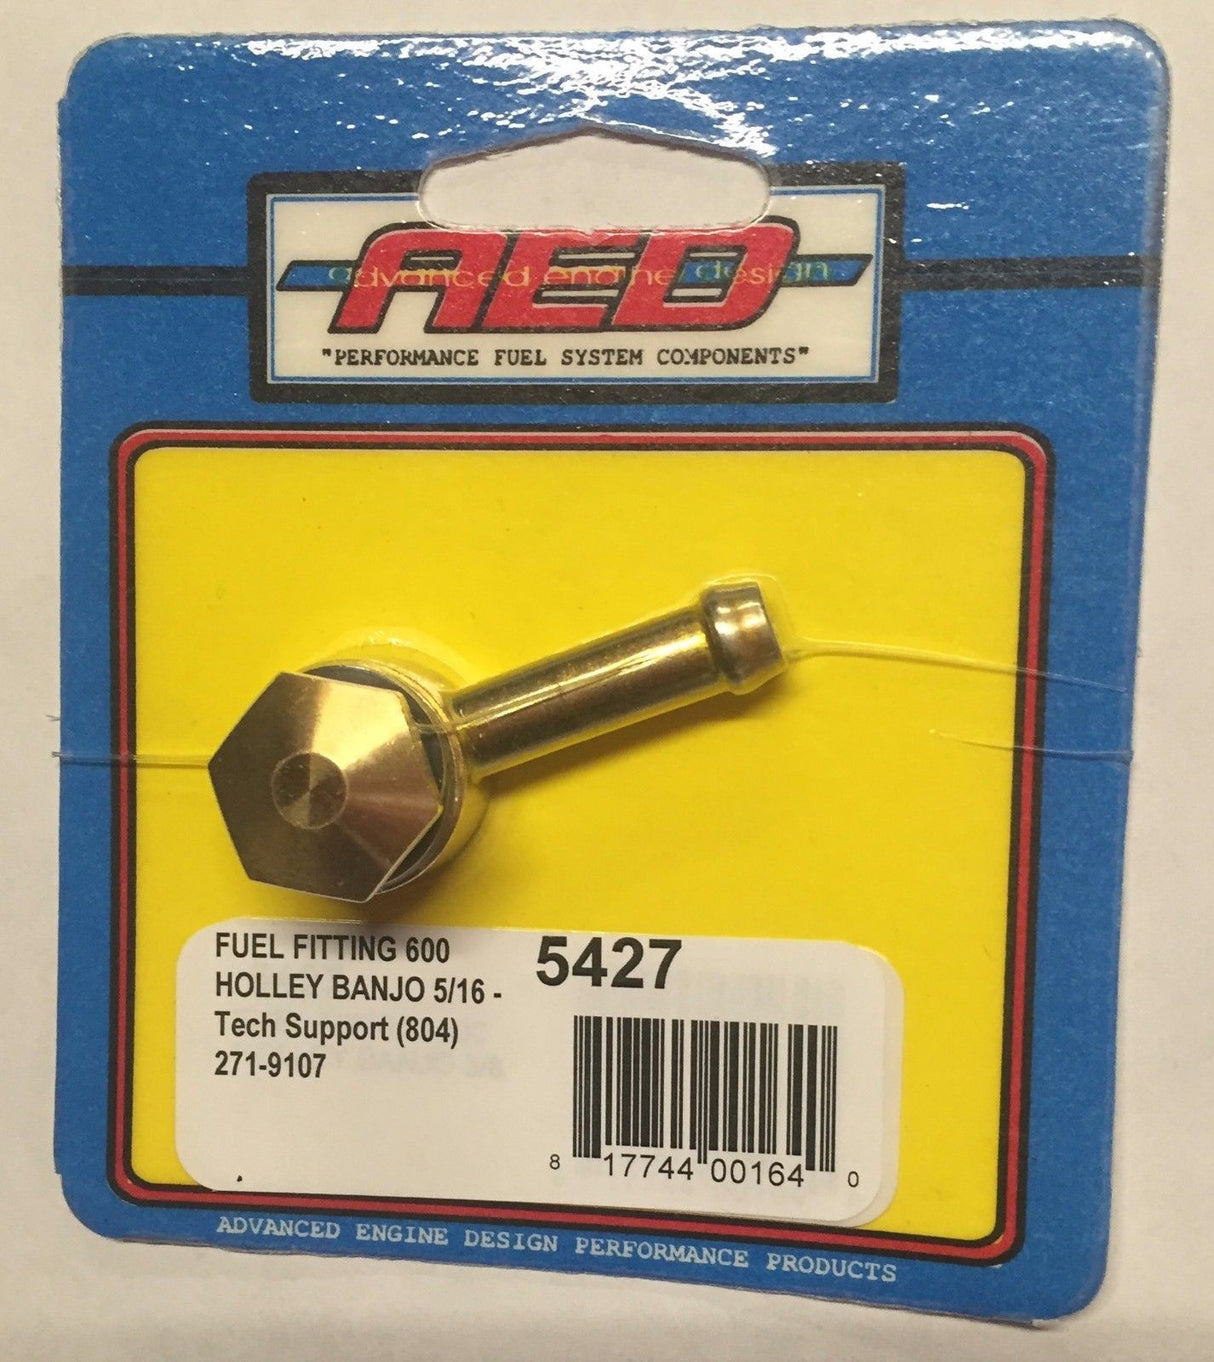 AED 5427 Fuel Bowl Fittings 600 Holley Banjo - NEW